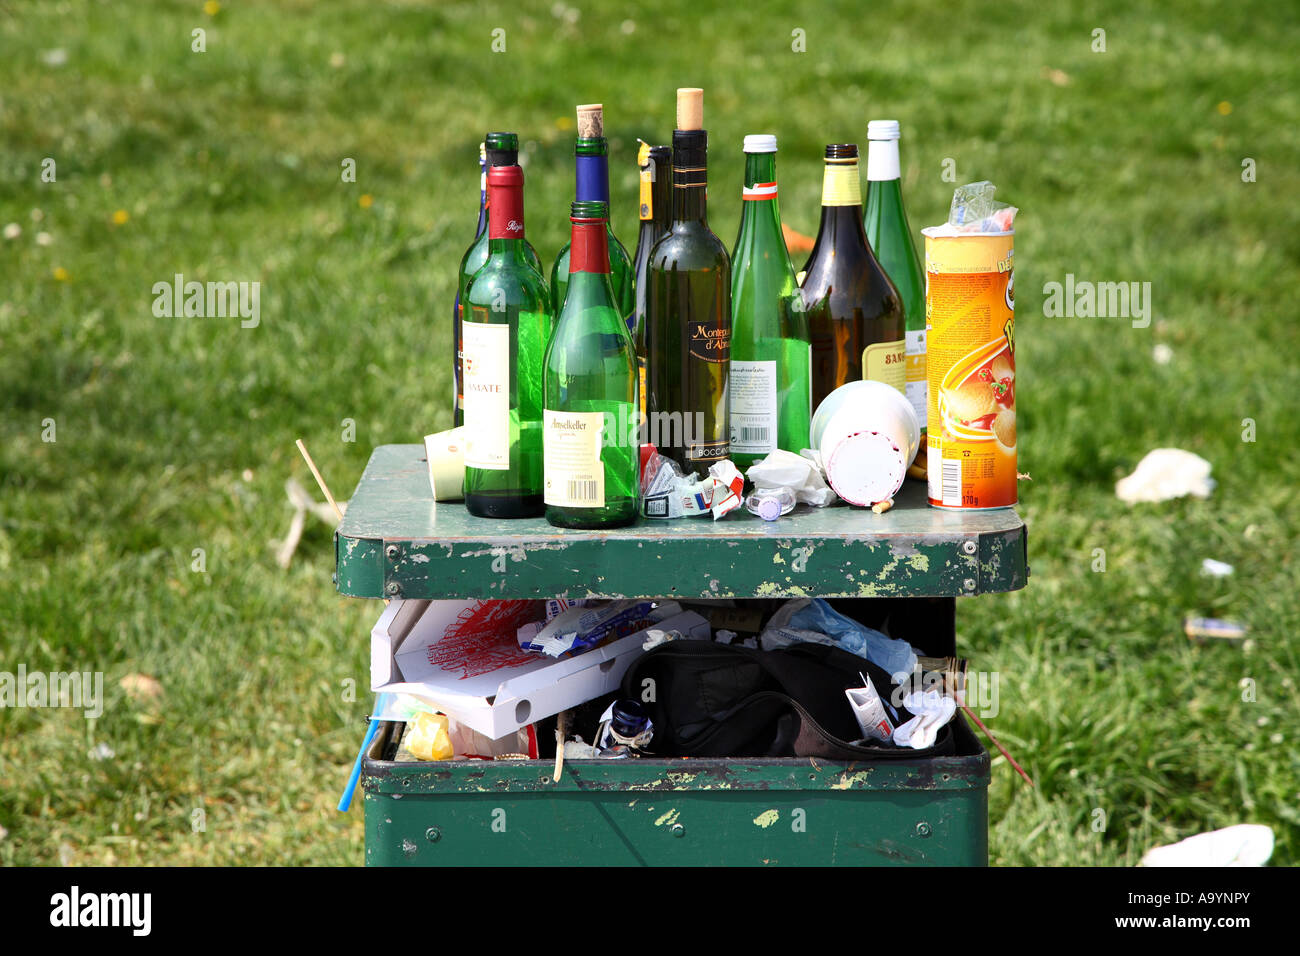 Garbage can full with empty bottles Stock Photo